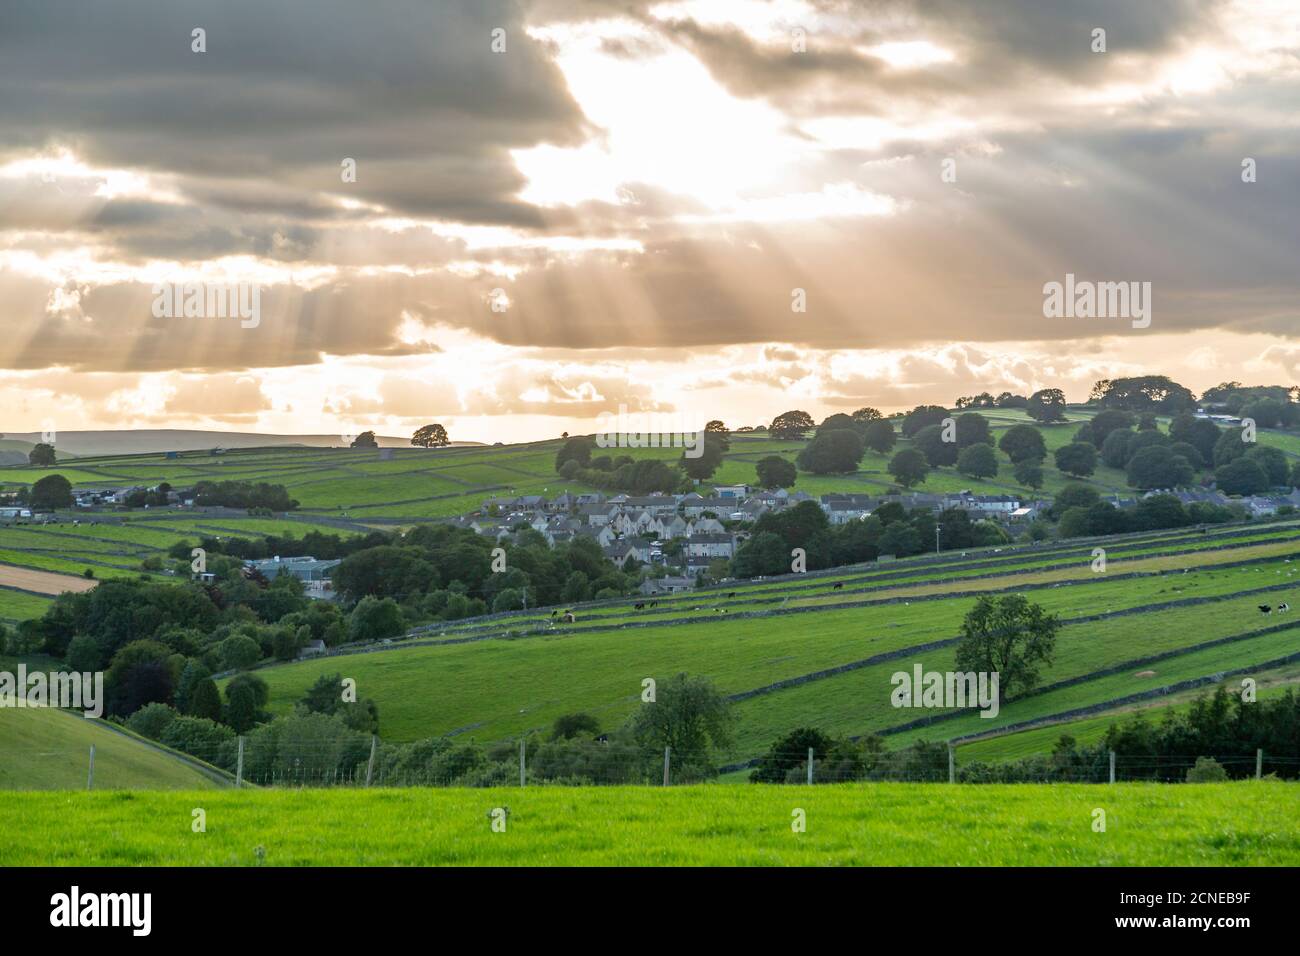 View of Tideswell and countryside near Litton, Peak District National Park, Derbyshire, England, United Kingdom, Europe Stock Photo